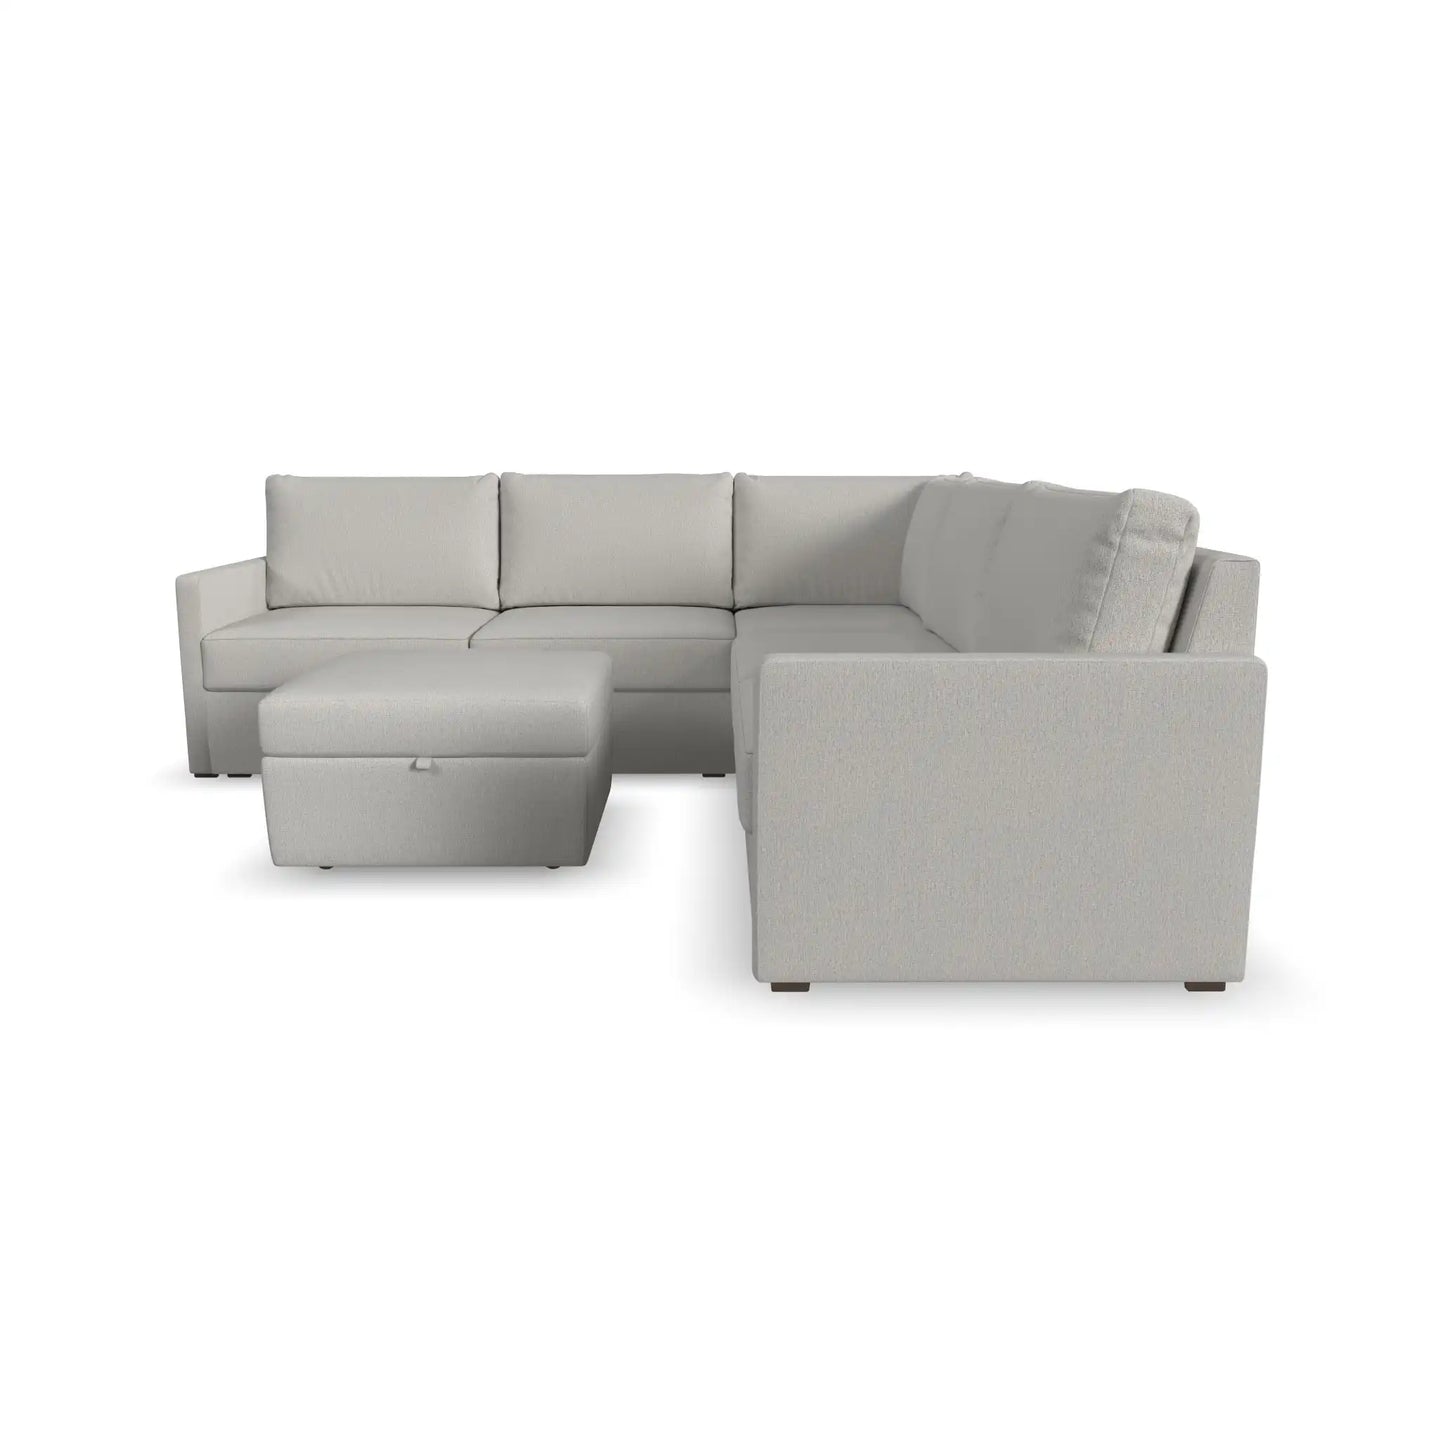 Flex 5-Seat Sectional with Narrow Arm and Storage Ottoman - Frost